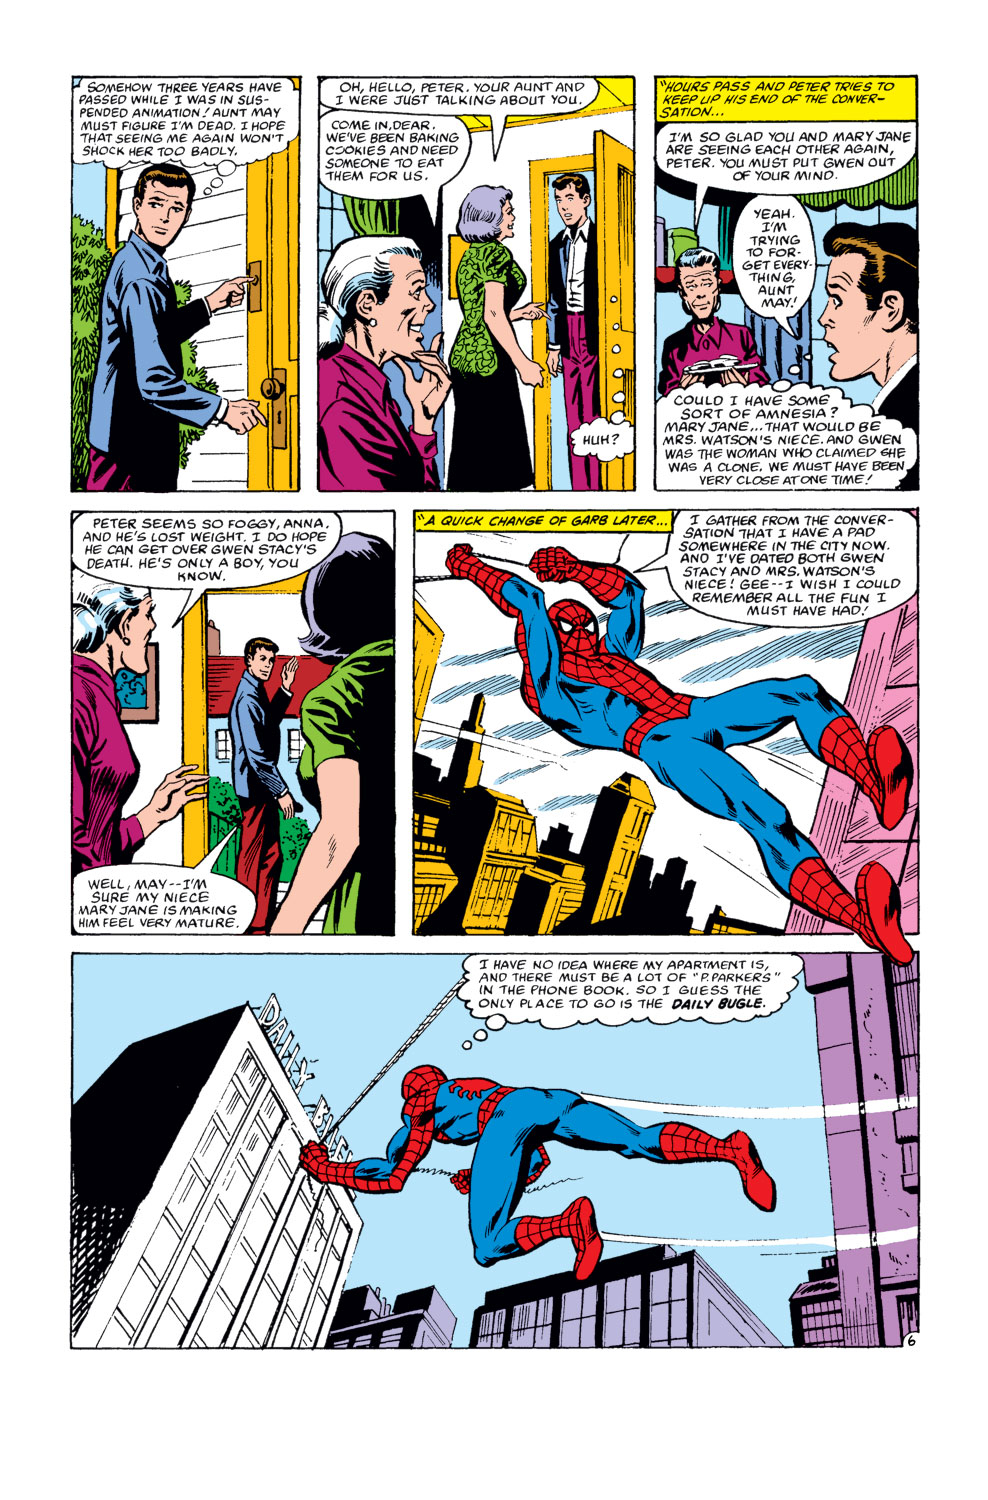 What If? (1977) issue 30 - Spider-Man's clone lived - Page 7